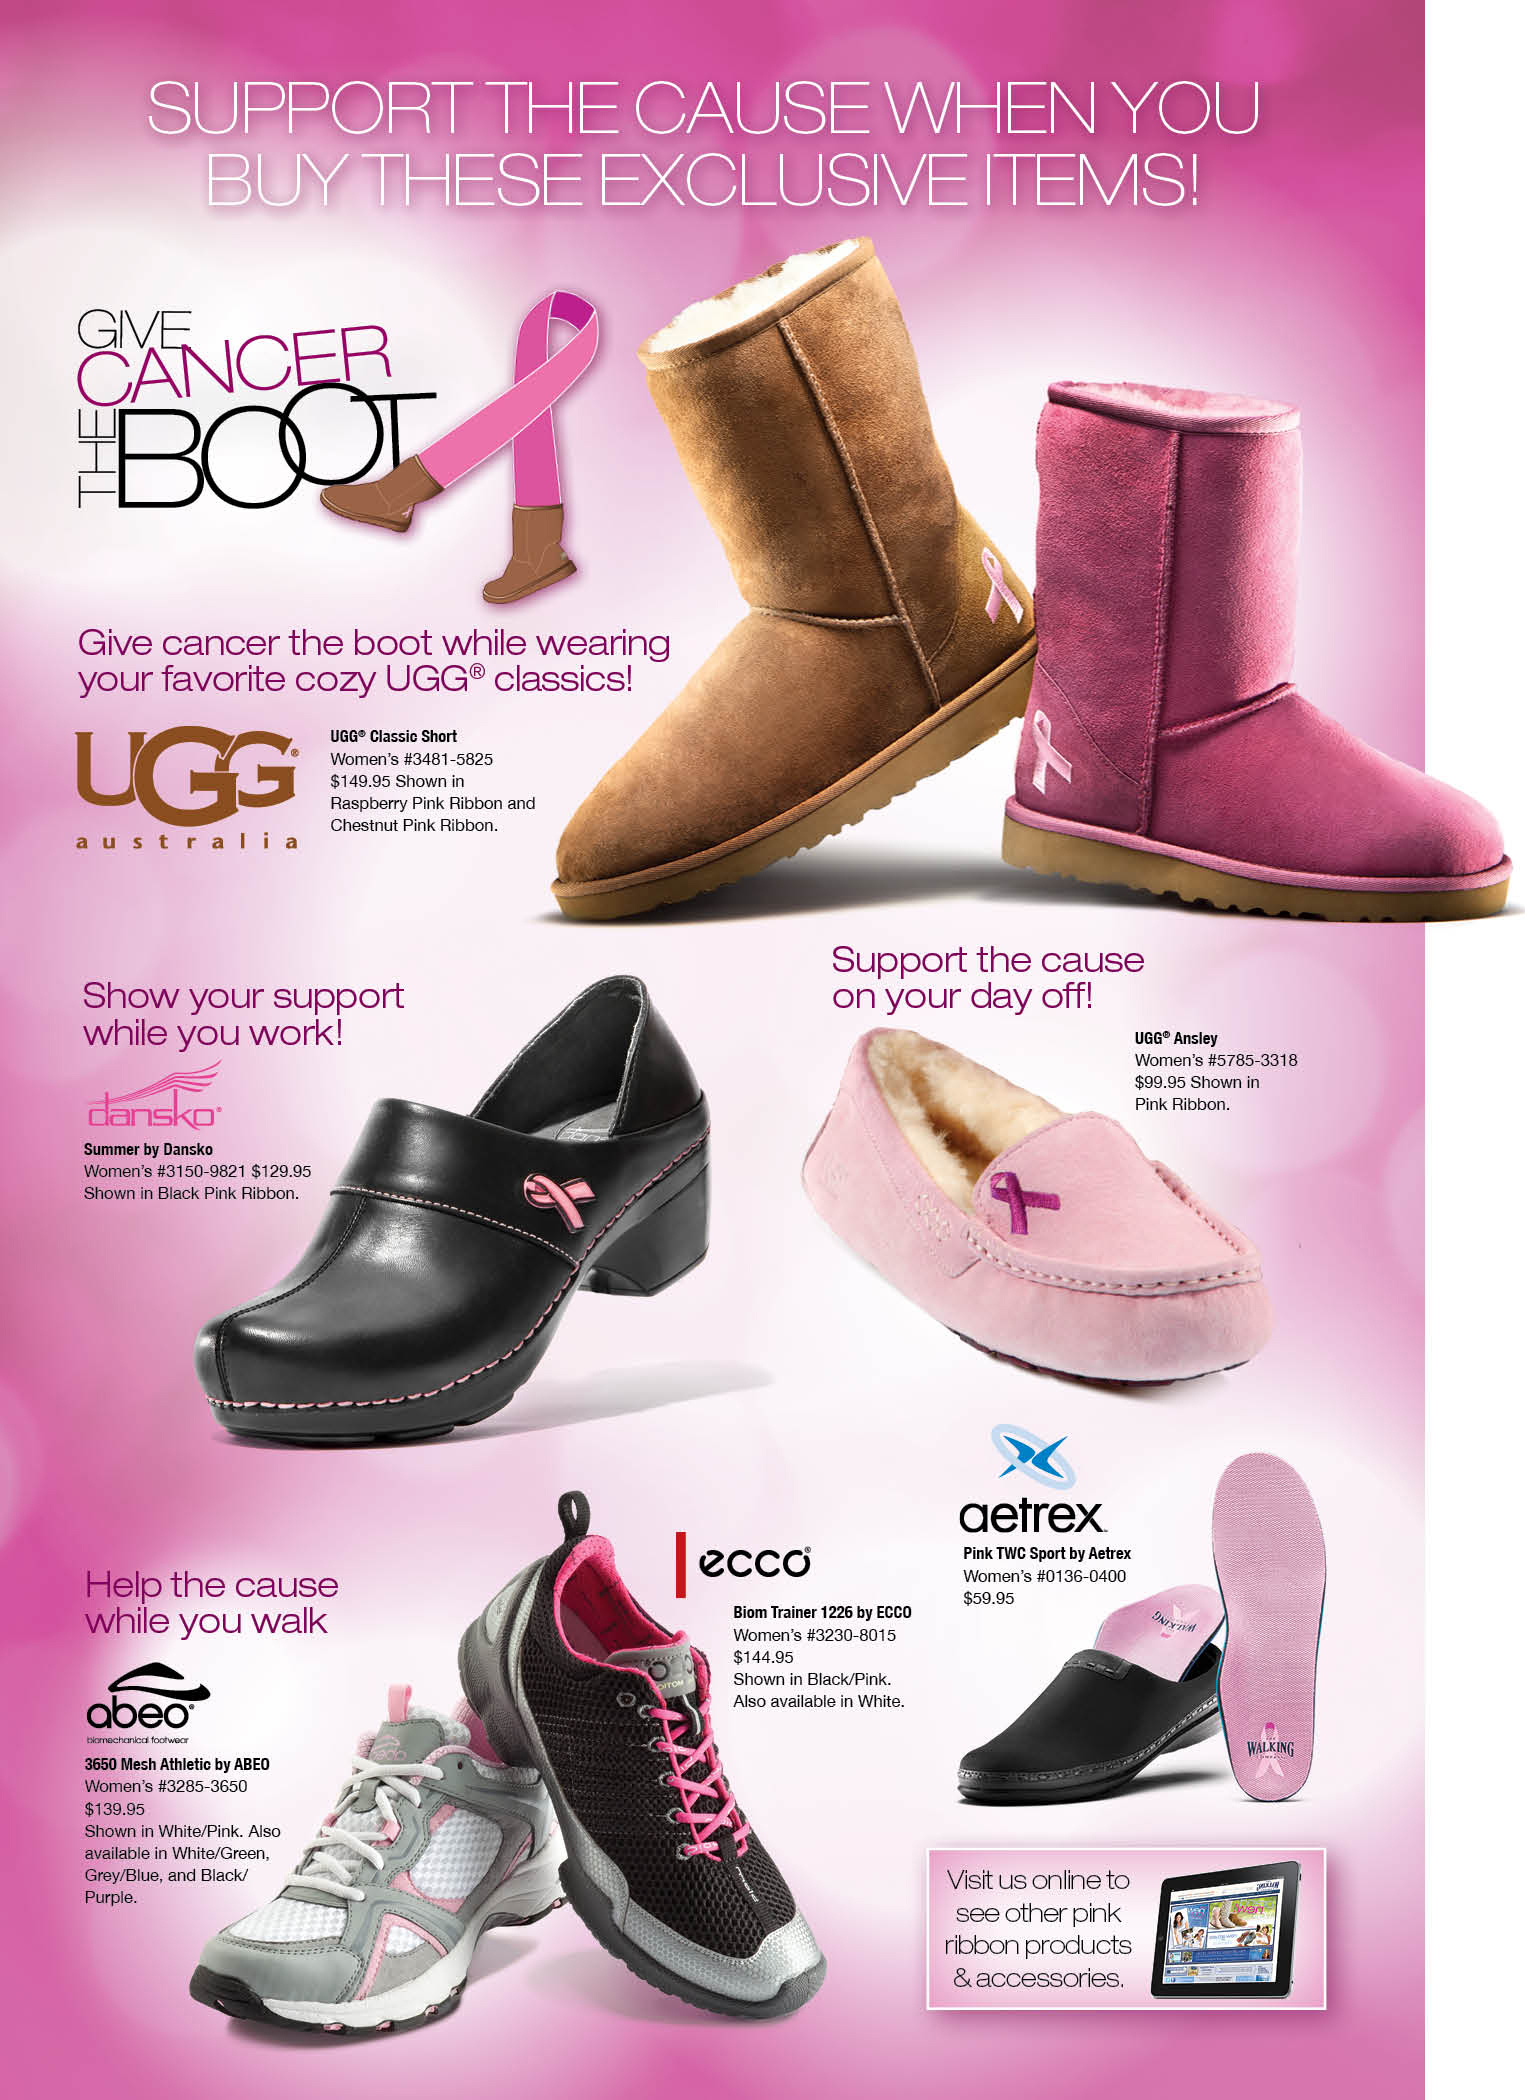 ugg boots with pink ribbon